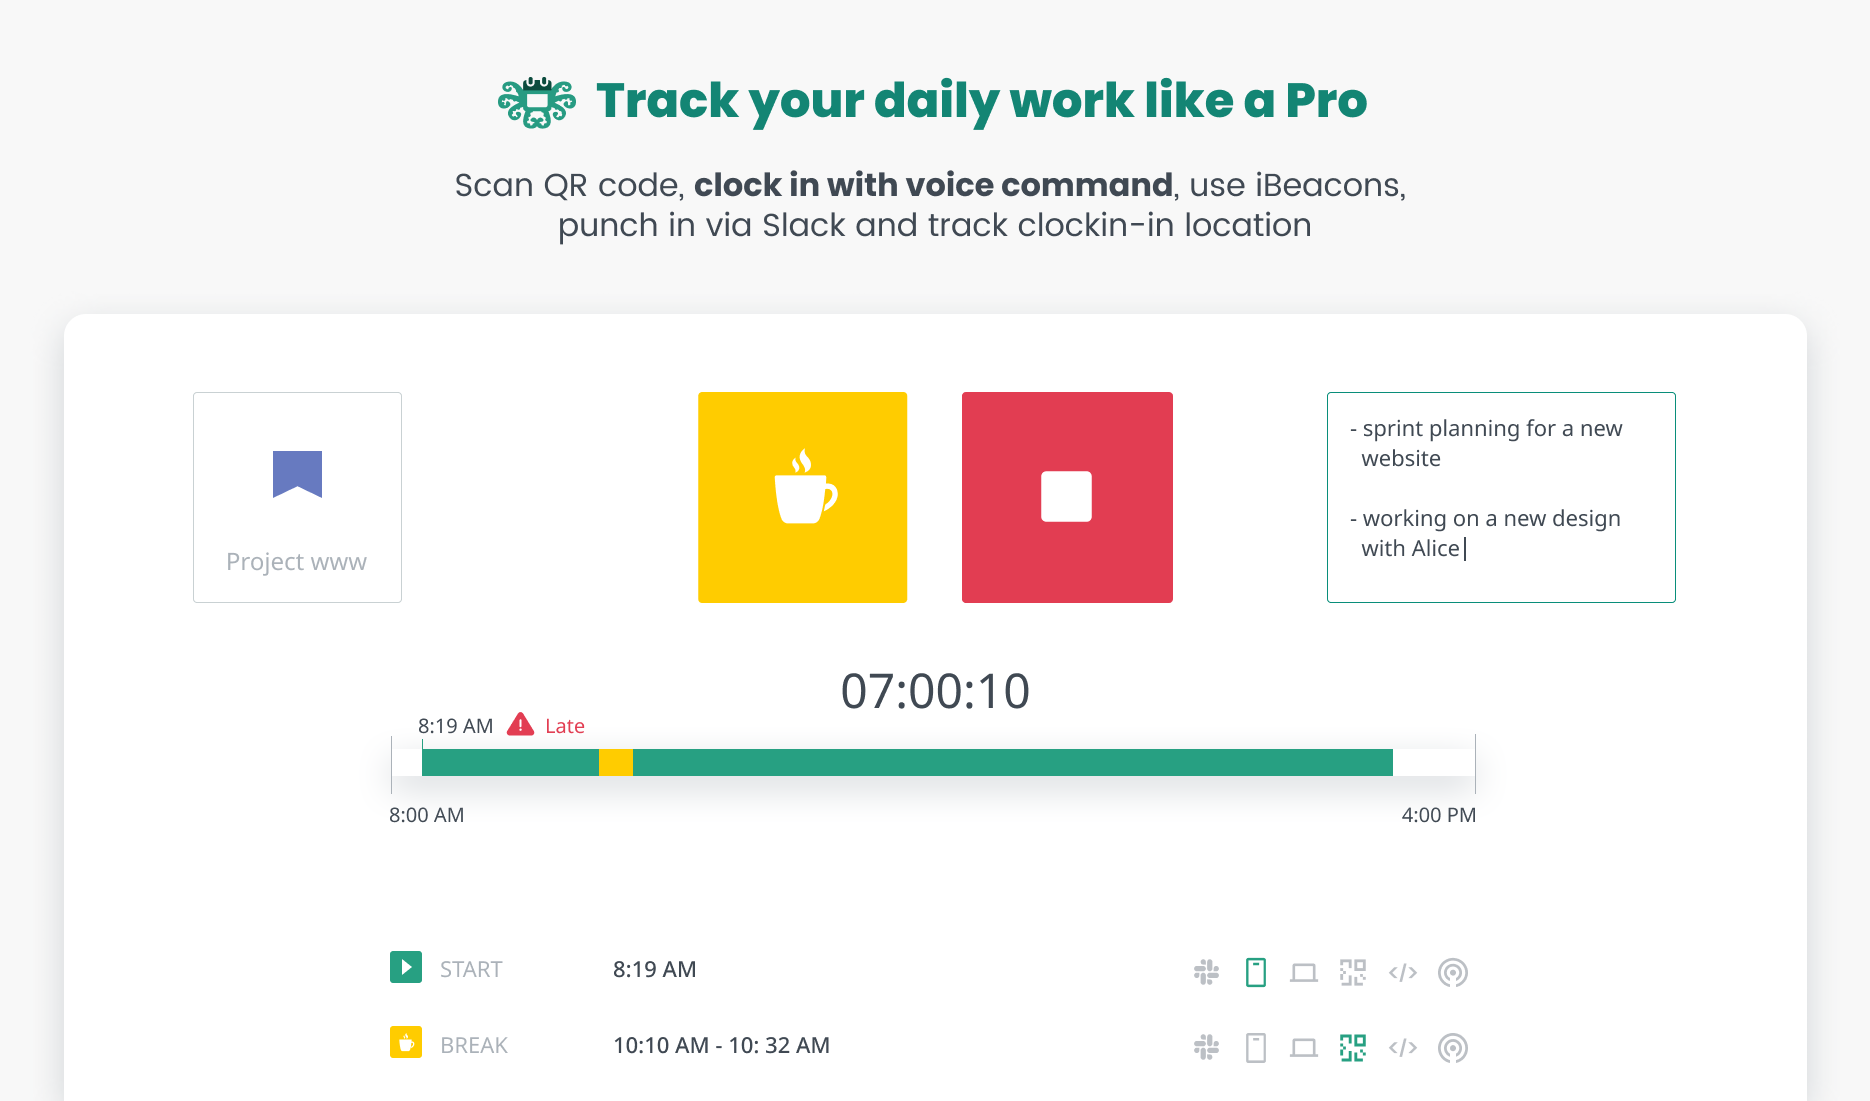 Clock in/out and see all the details about your working day